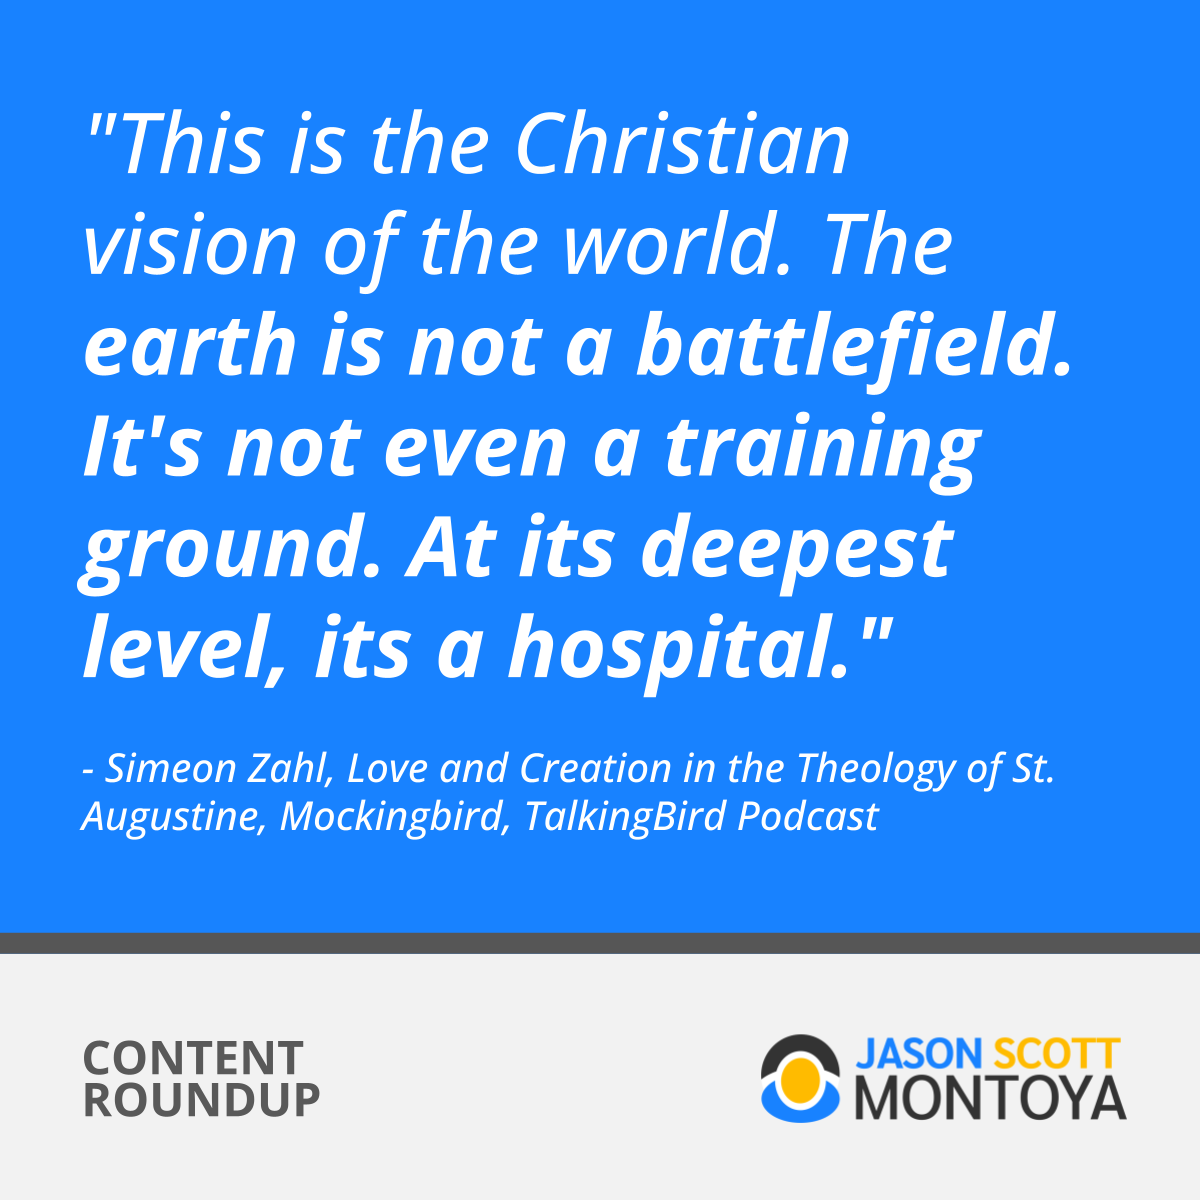 "This is the Christian vision of the world. The earth is not a battlefield. It's not even a training ground. At its deepest level, its a hospital."  - Simeon Zahl, Love and Creation in the Theology of St. Augustine, Mockingbird, TalkingBird Podcast